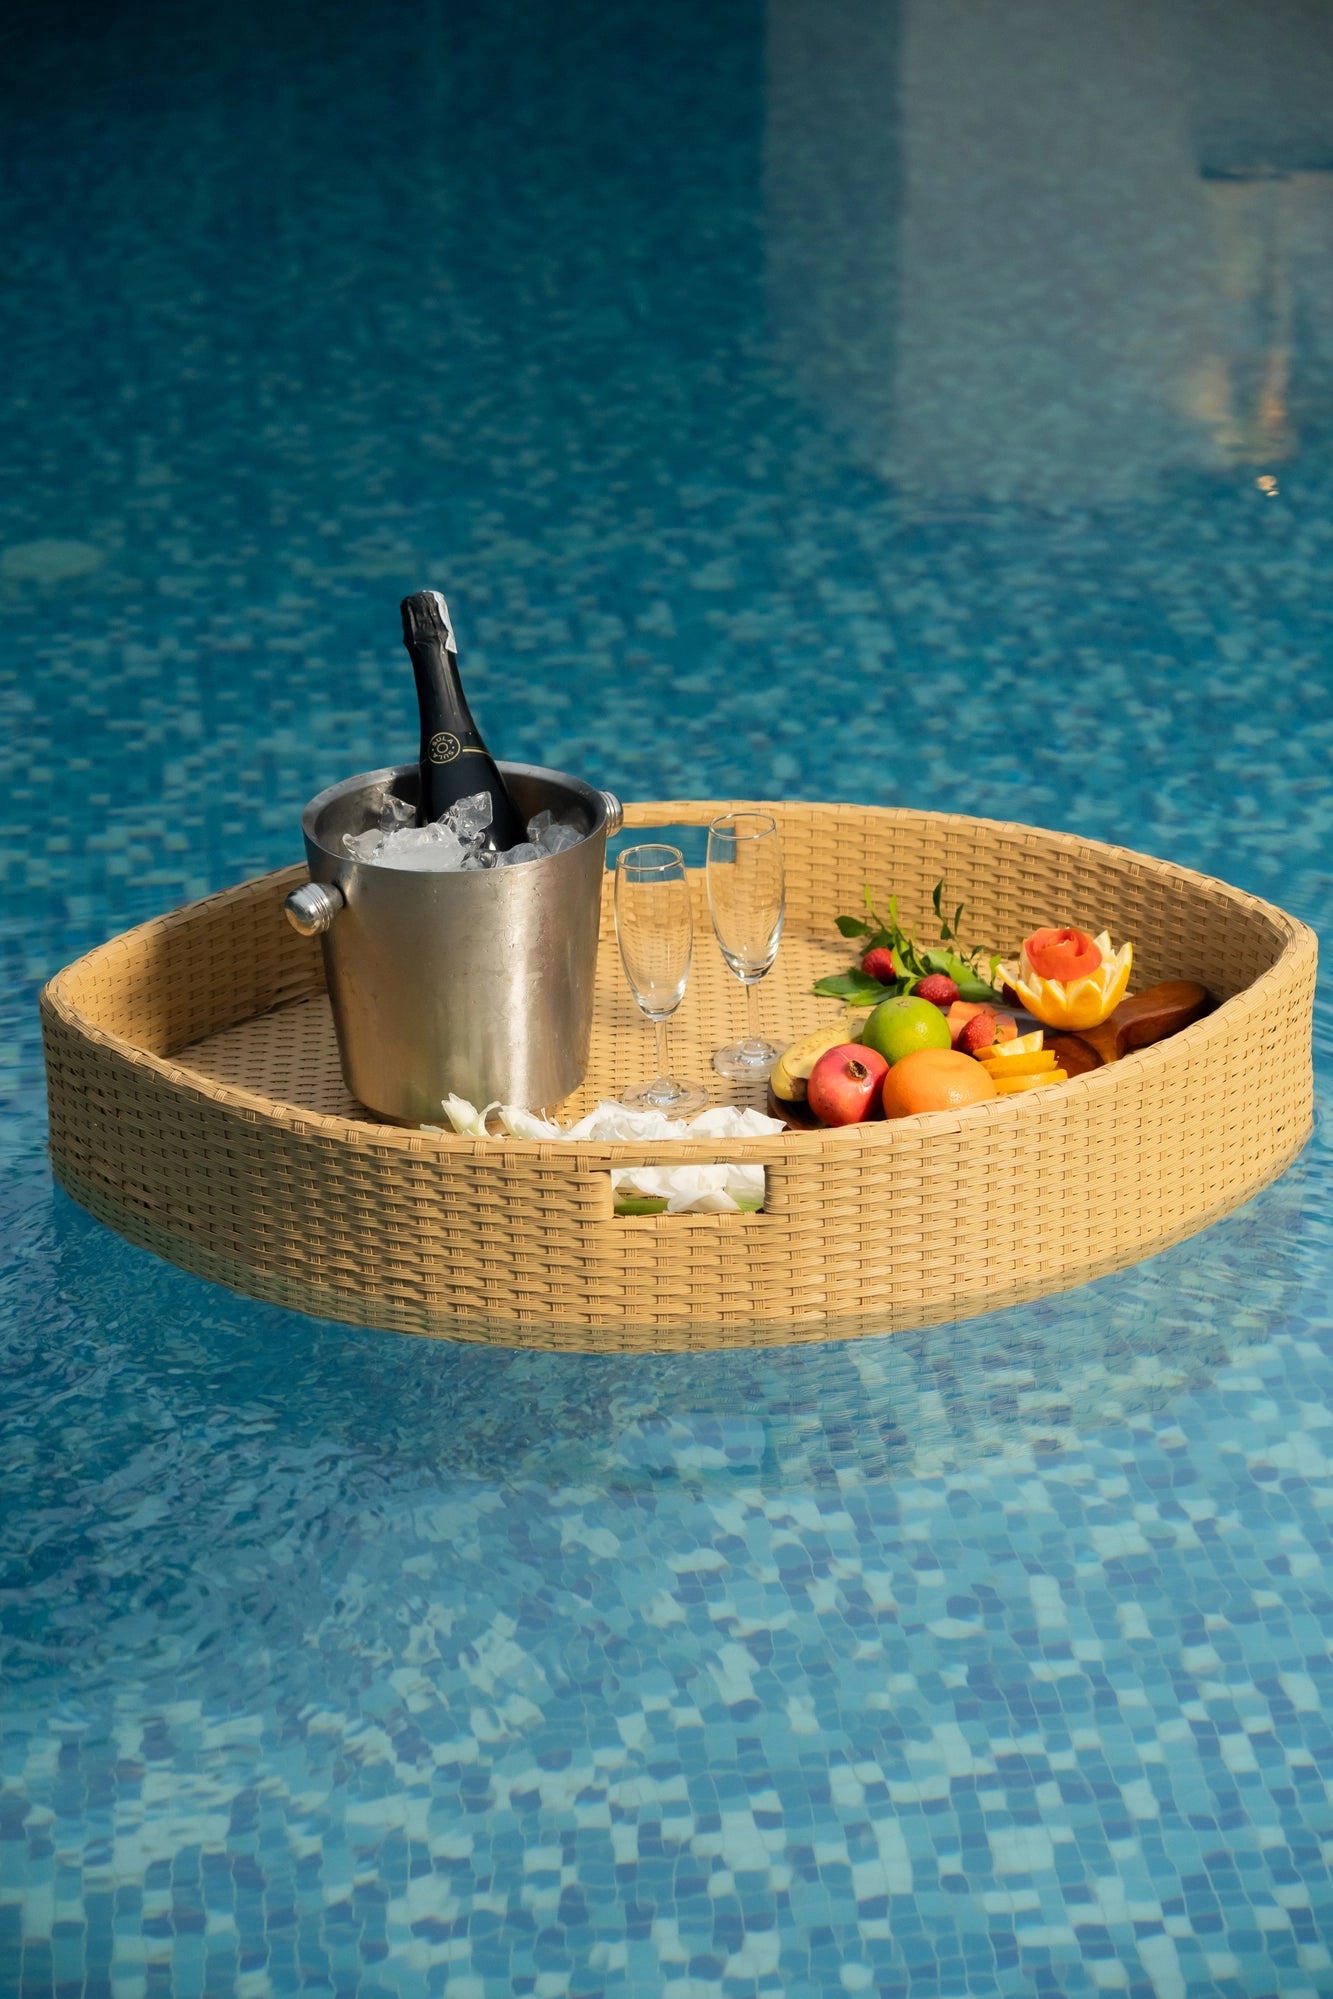 Floating breakfast tray Poolside luxury Pool party essentials Versatile pool floats Rattan style design Handcrafted in Bali Synthetic fibers Environmentally friendly Non-toxic materials Multiple uses Hot tub accessory Summer pool party Portable serving tray Resort amenities Unique guest experiences Luxury pool accessories Innovative hotel amenity tesu 